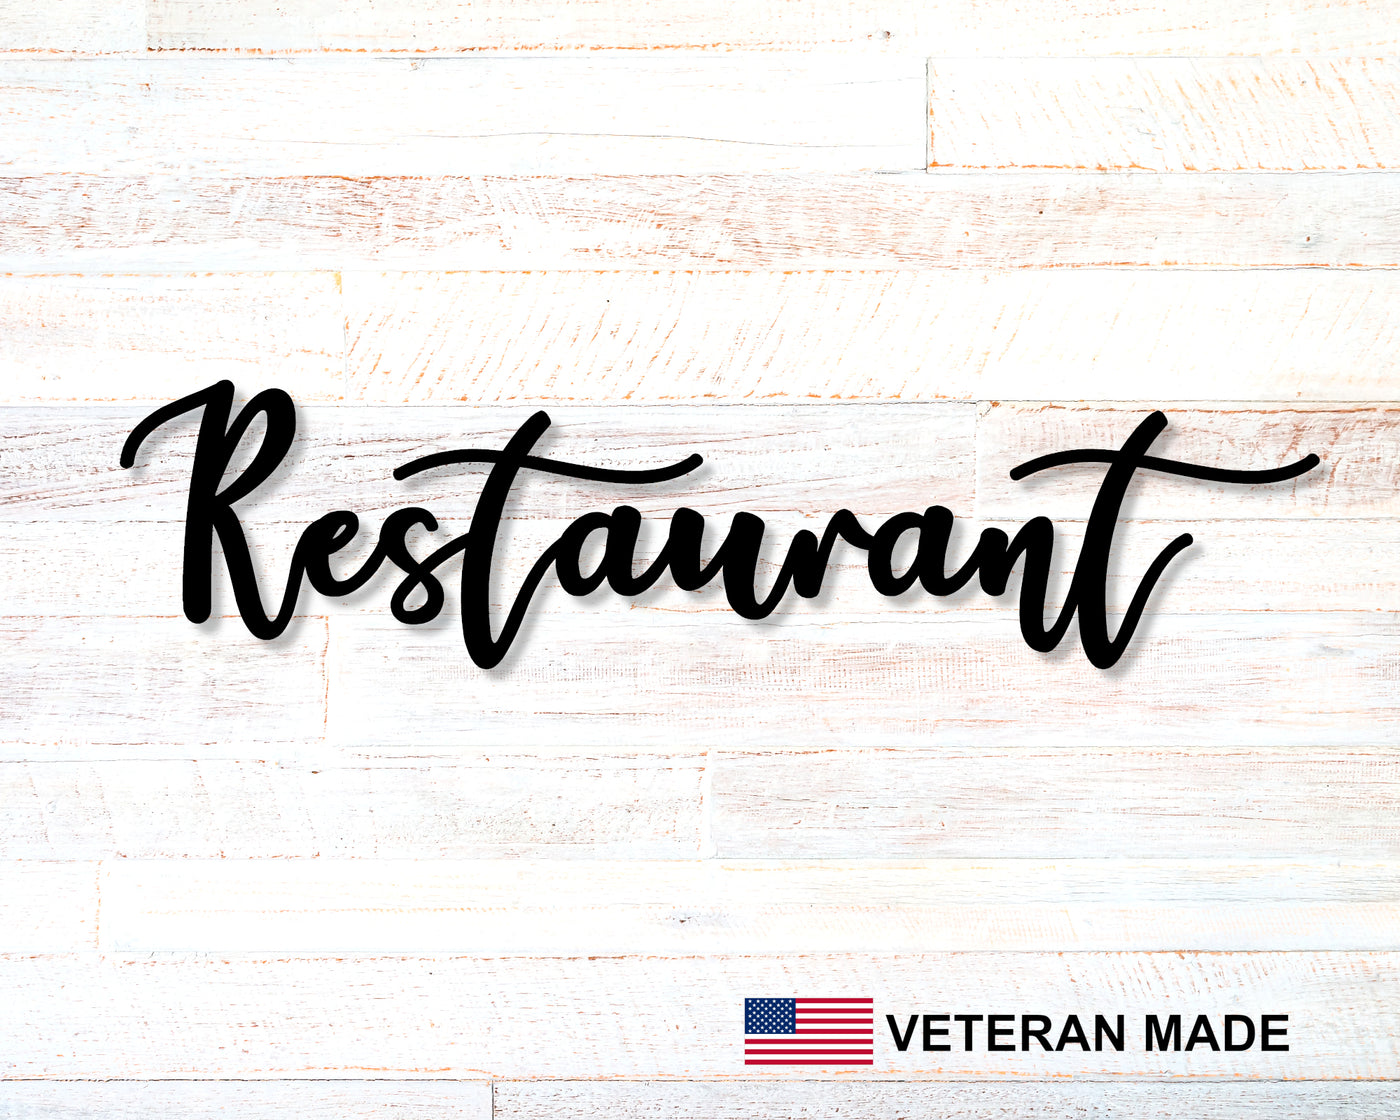 Restaurant Cursive Metal Word Art - Madison Iron and Wood - Personalized sign - metal outdoor decor - Steel deocrations - american made products - veteran owned business products - fencing decorations - fencing supplies - custom wall decorations - personalized wall signs - steel - decorative post caps - steel post caps - metal post caps - brackets - structural brackets - home improvement - easter - easter decorations - easter gift - easter yard decor